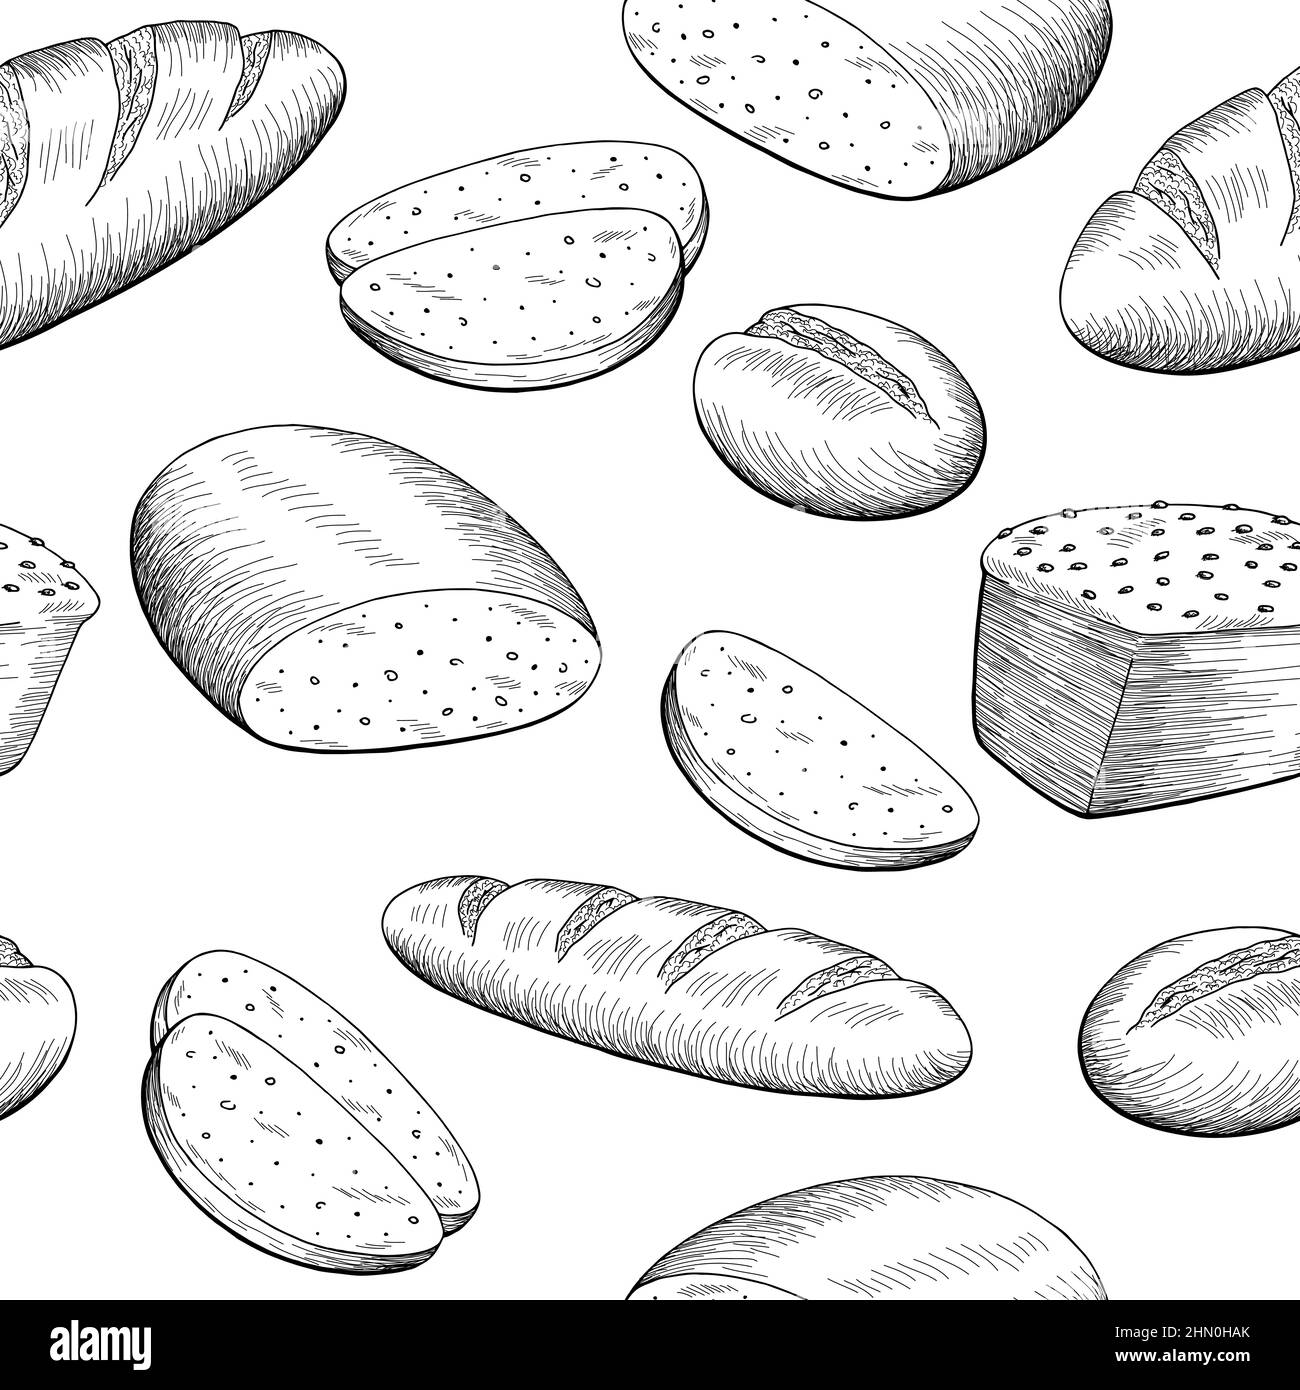 Bread graphic black white seamless pattern background sketch illustration vector Stock Vector